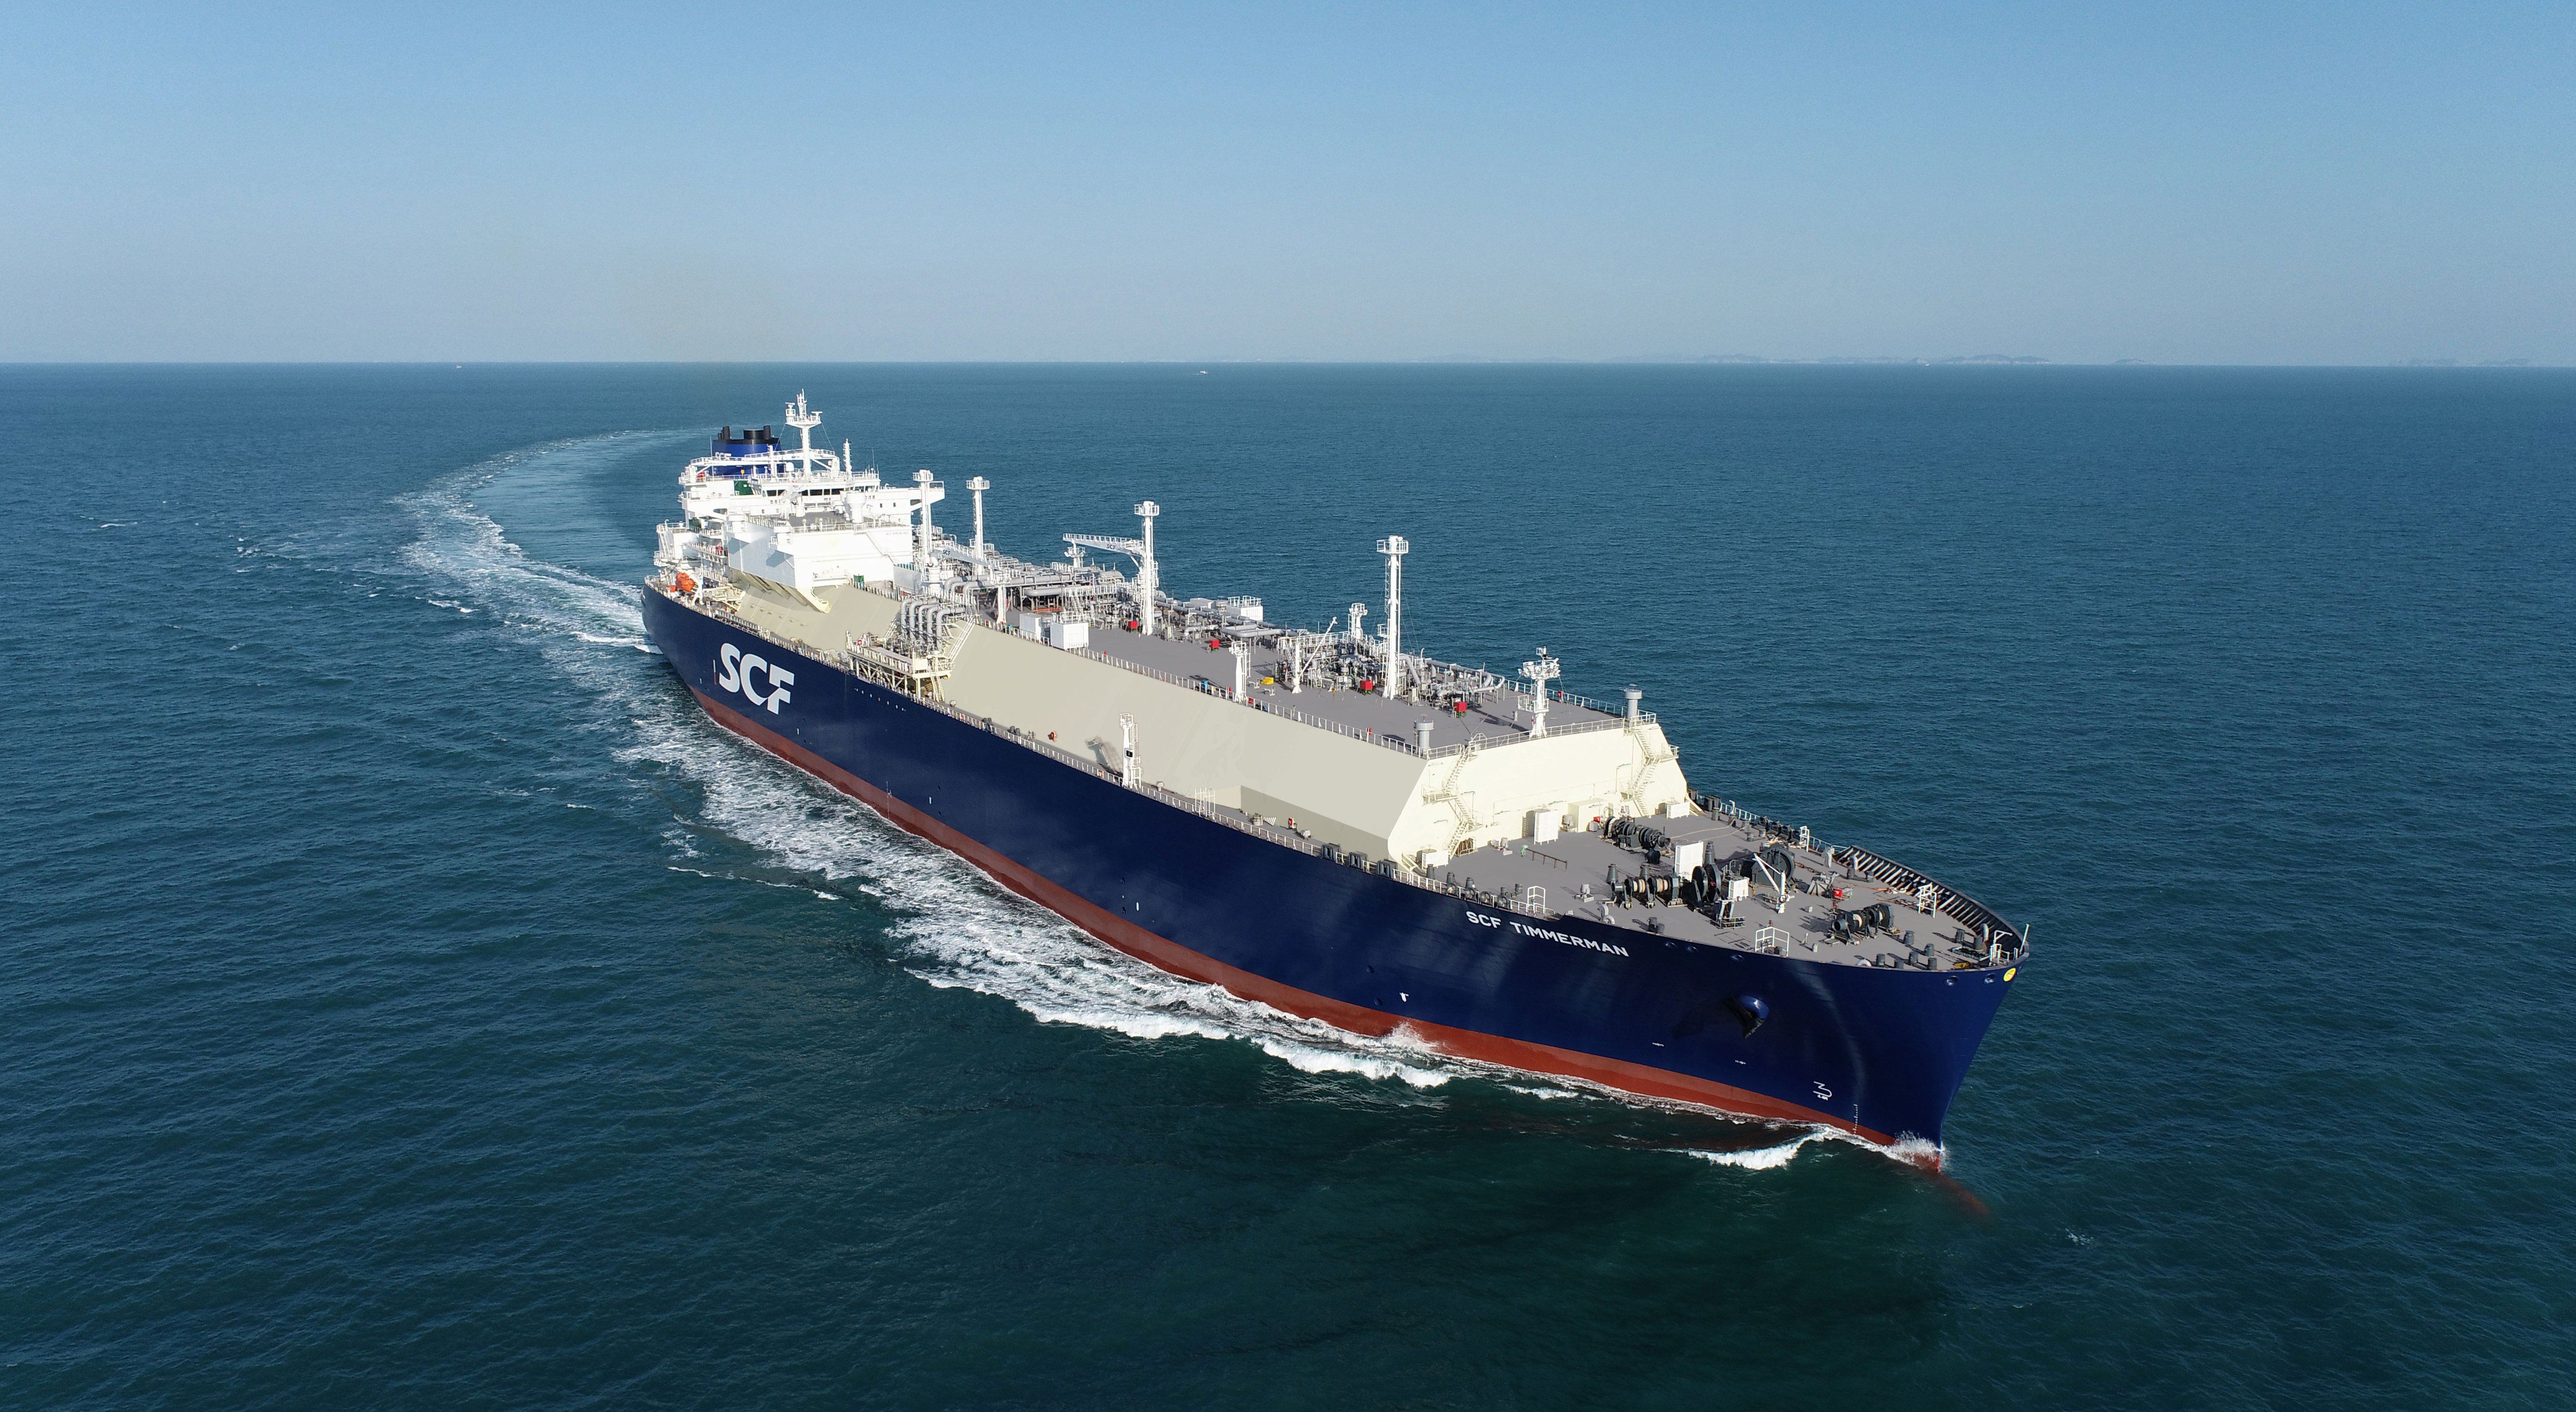 SCF takes delivery of new LNG carrier to expand long-standing partnership with Shell